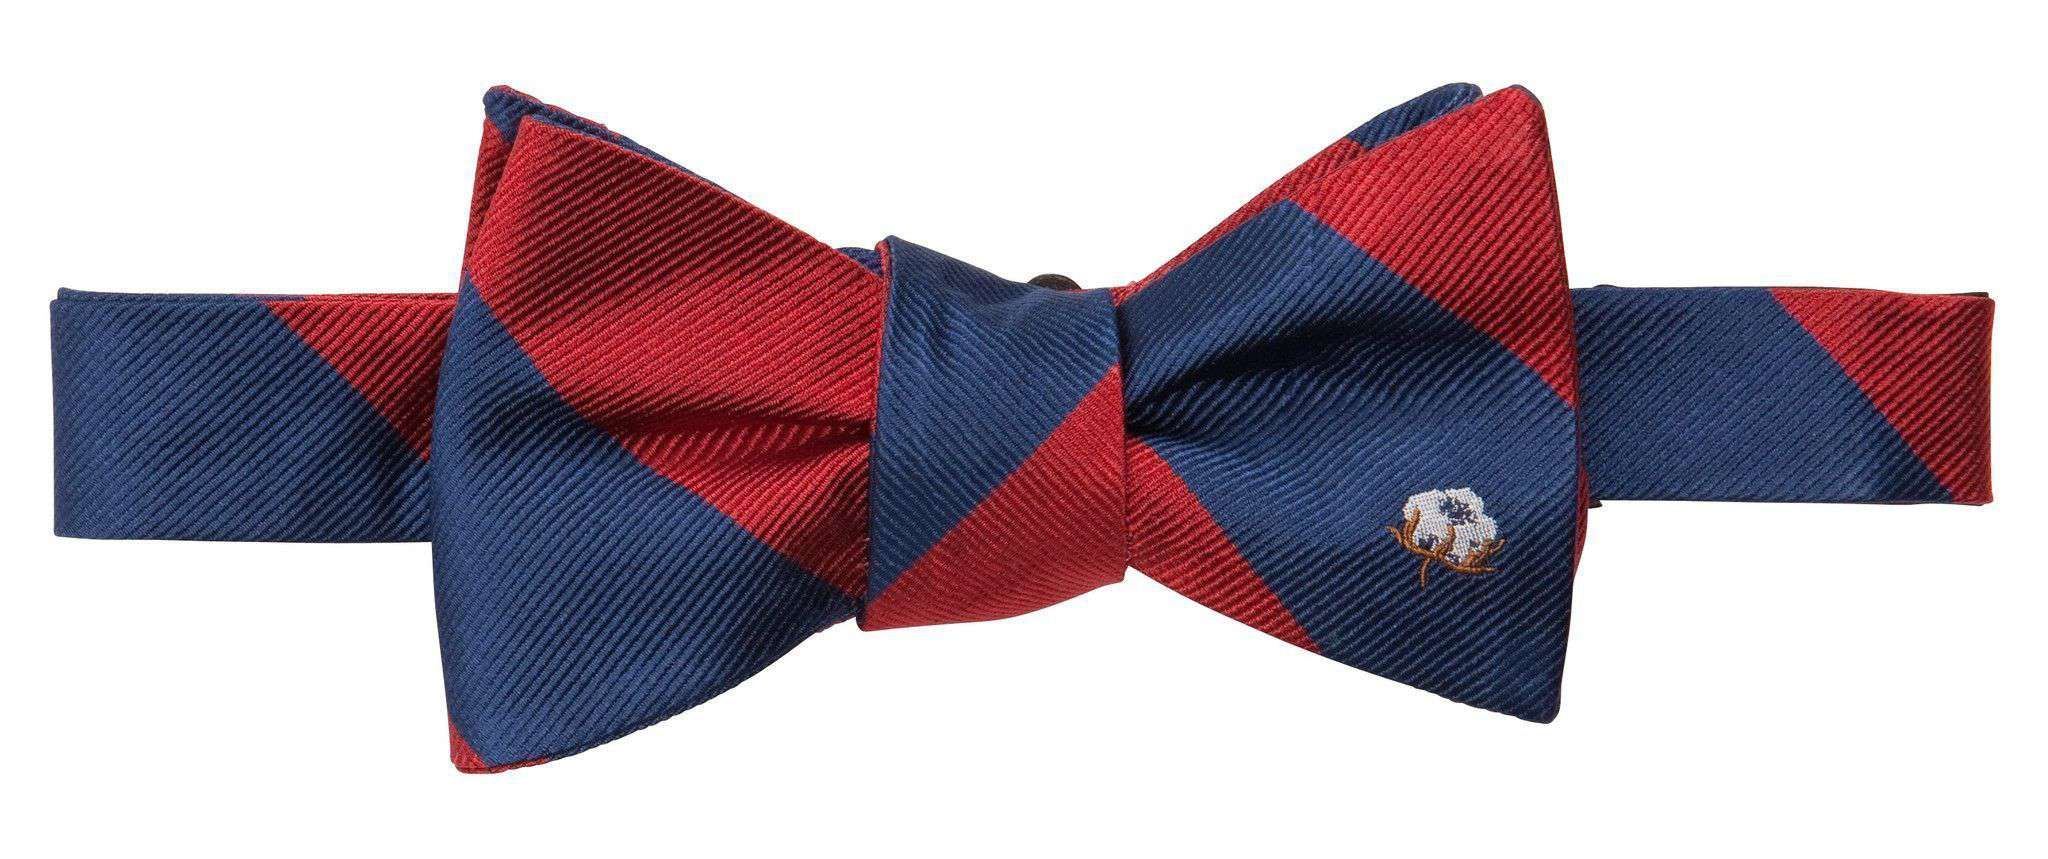 Southern Proper Cotton Boll Bow Tie in Red/Navy